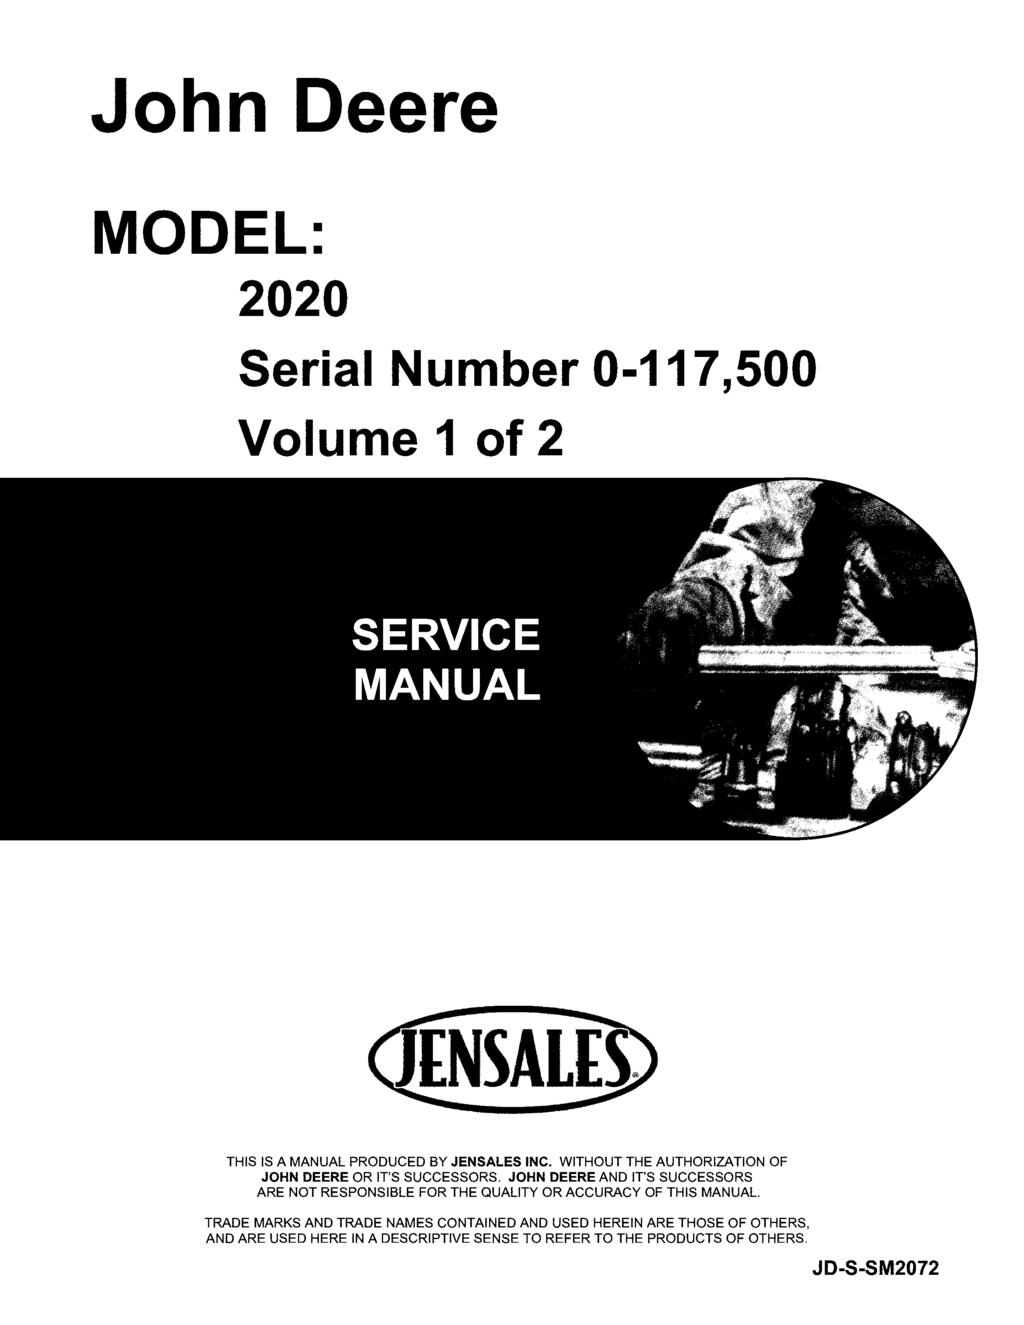 John Deere MODEL: 2020 Serial Number 0-117,500 Volume 1 of 2 THIS IS A MANUAL PRODUCED BY JENSALES INC. WITHOUT THE AUTHORIZATION OF JOHN DEERE OR IT'S SUCCESSORS.